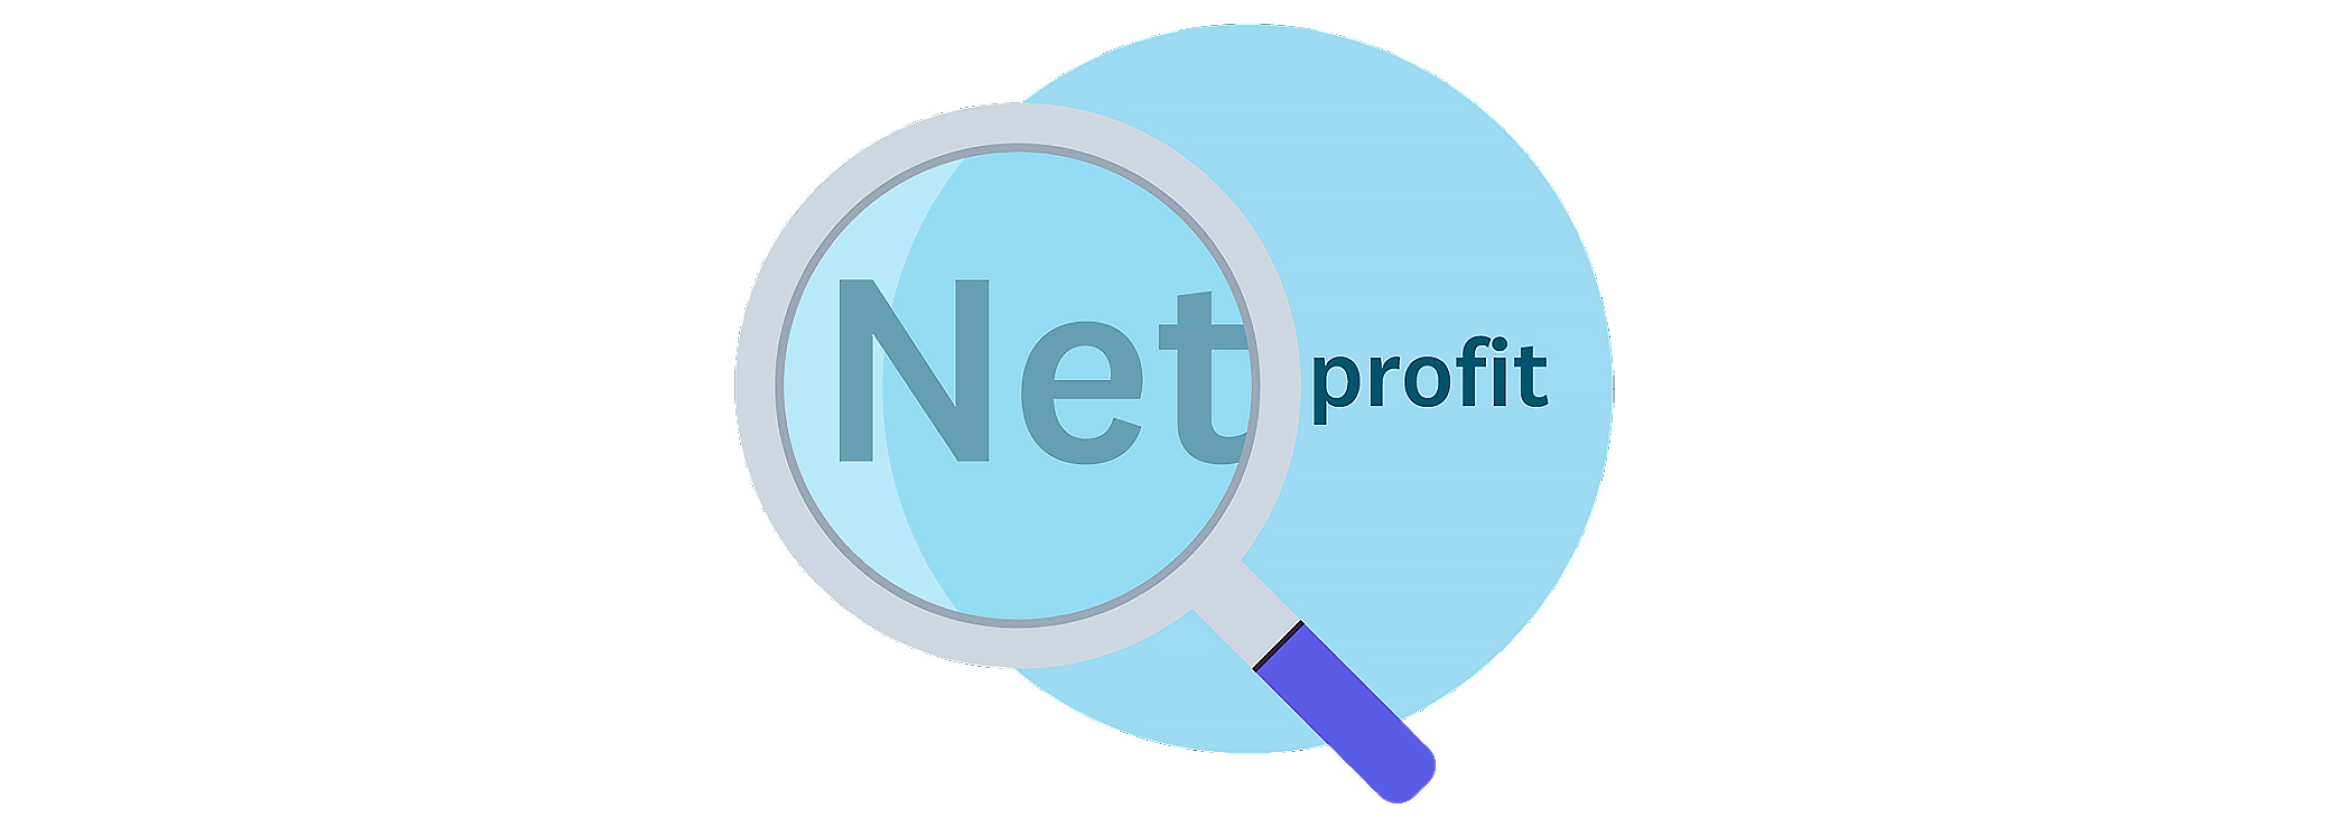 The words‘net profit’ began viewed through a magnifying glass.